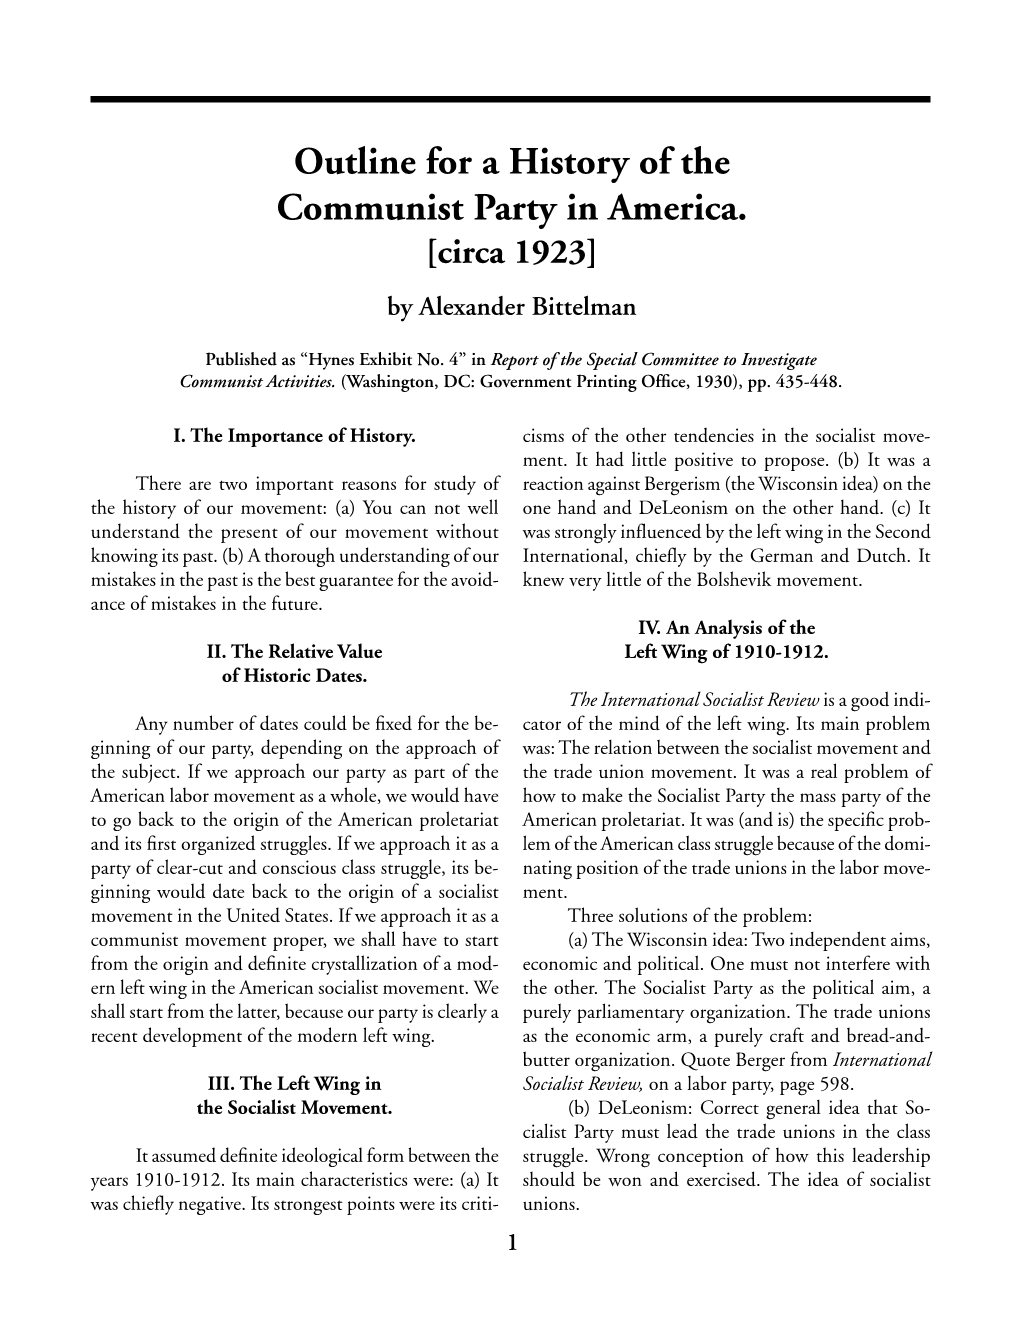 Outline for a History of the Communist Party in America. [Circa 1923] by Alexander Bittelman